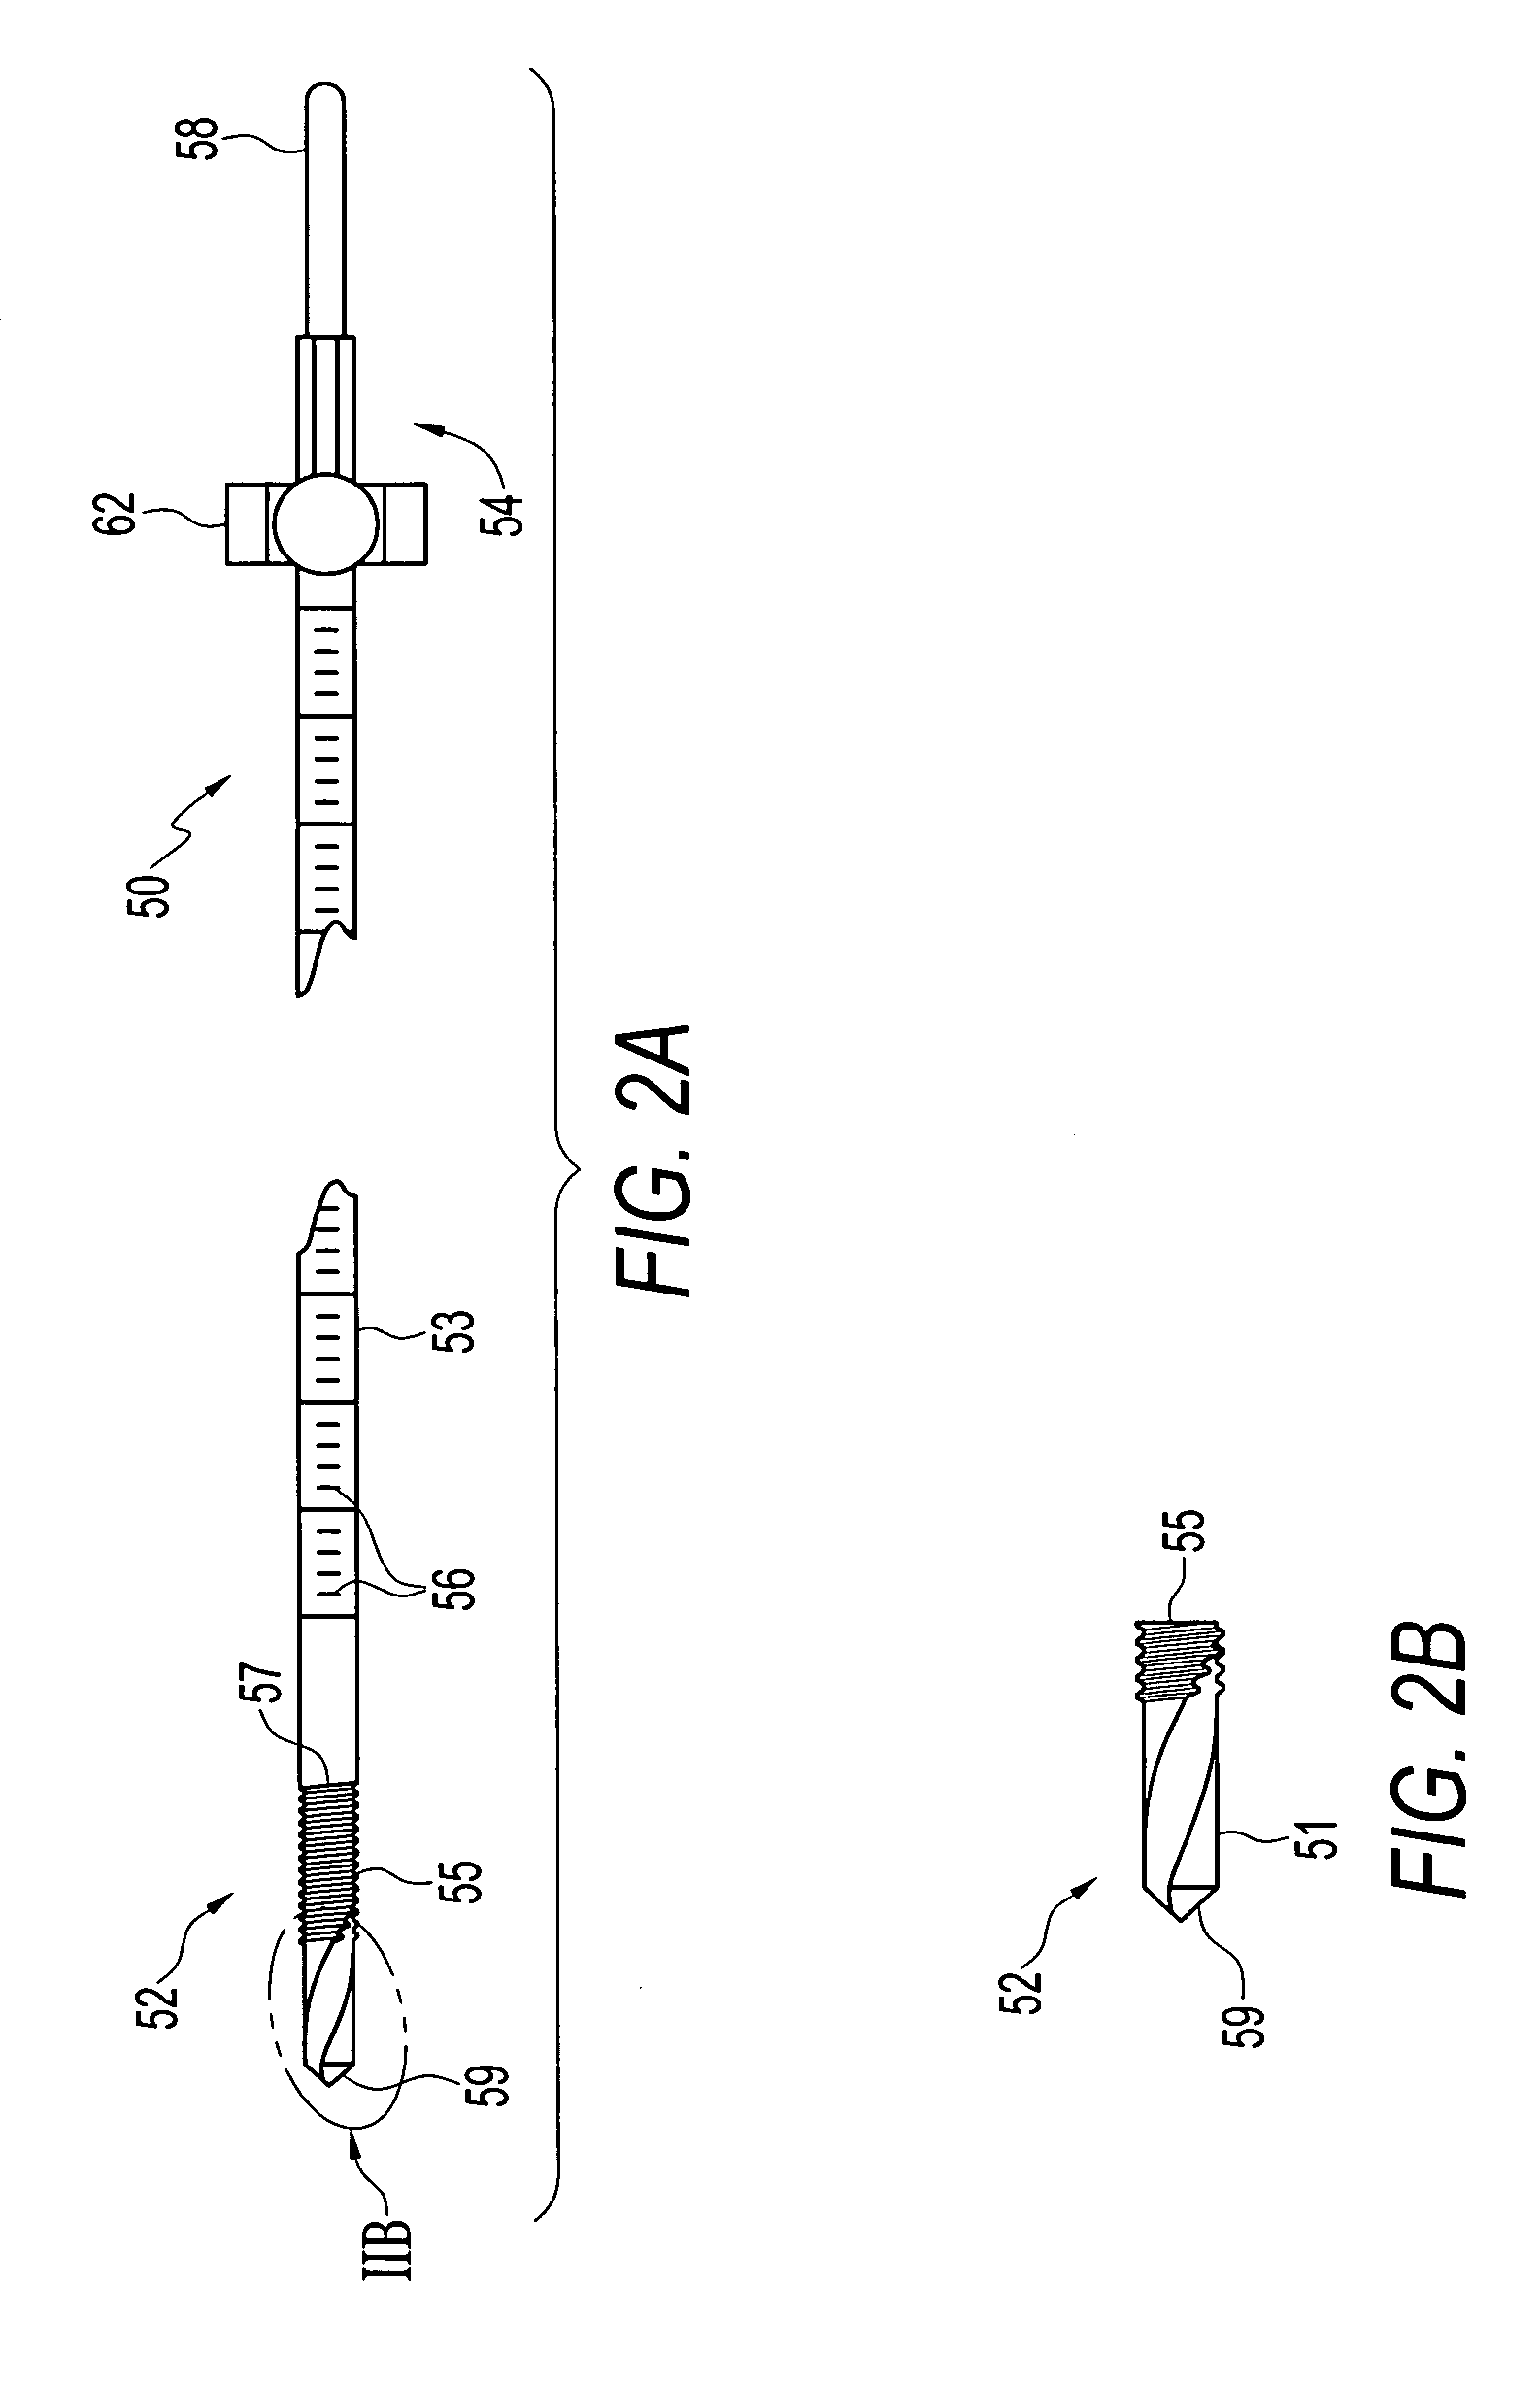 Retrodrill technique for insertion of autograft, allograft or synthetic osteochondral implants